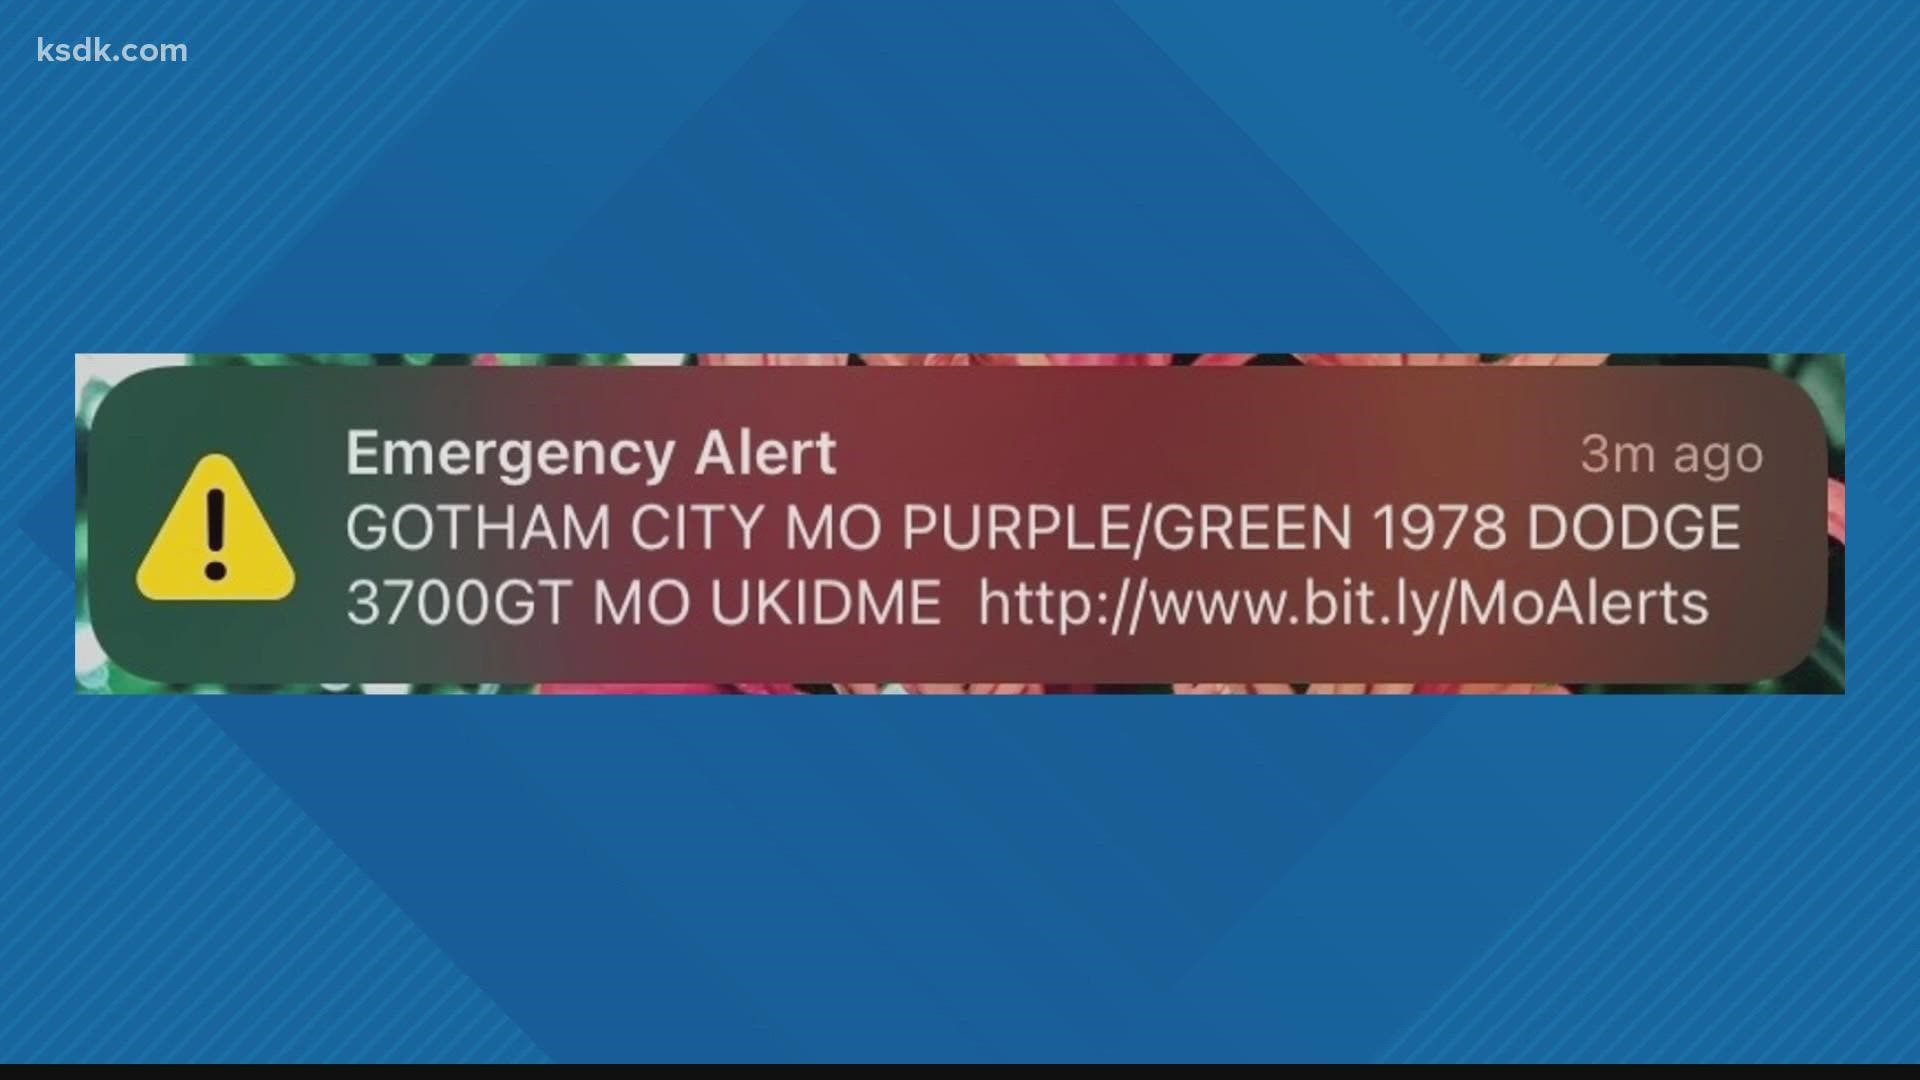 The alert warned people to look out for a purple and green 1978 Dodge 3700GT with a license plate "UKIDME".